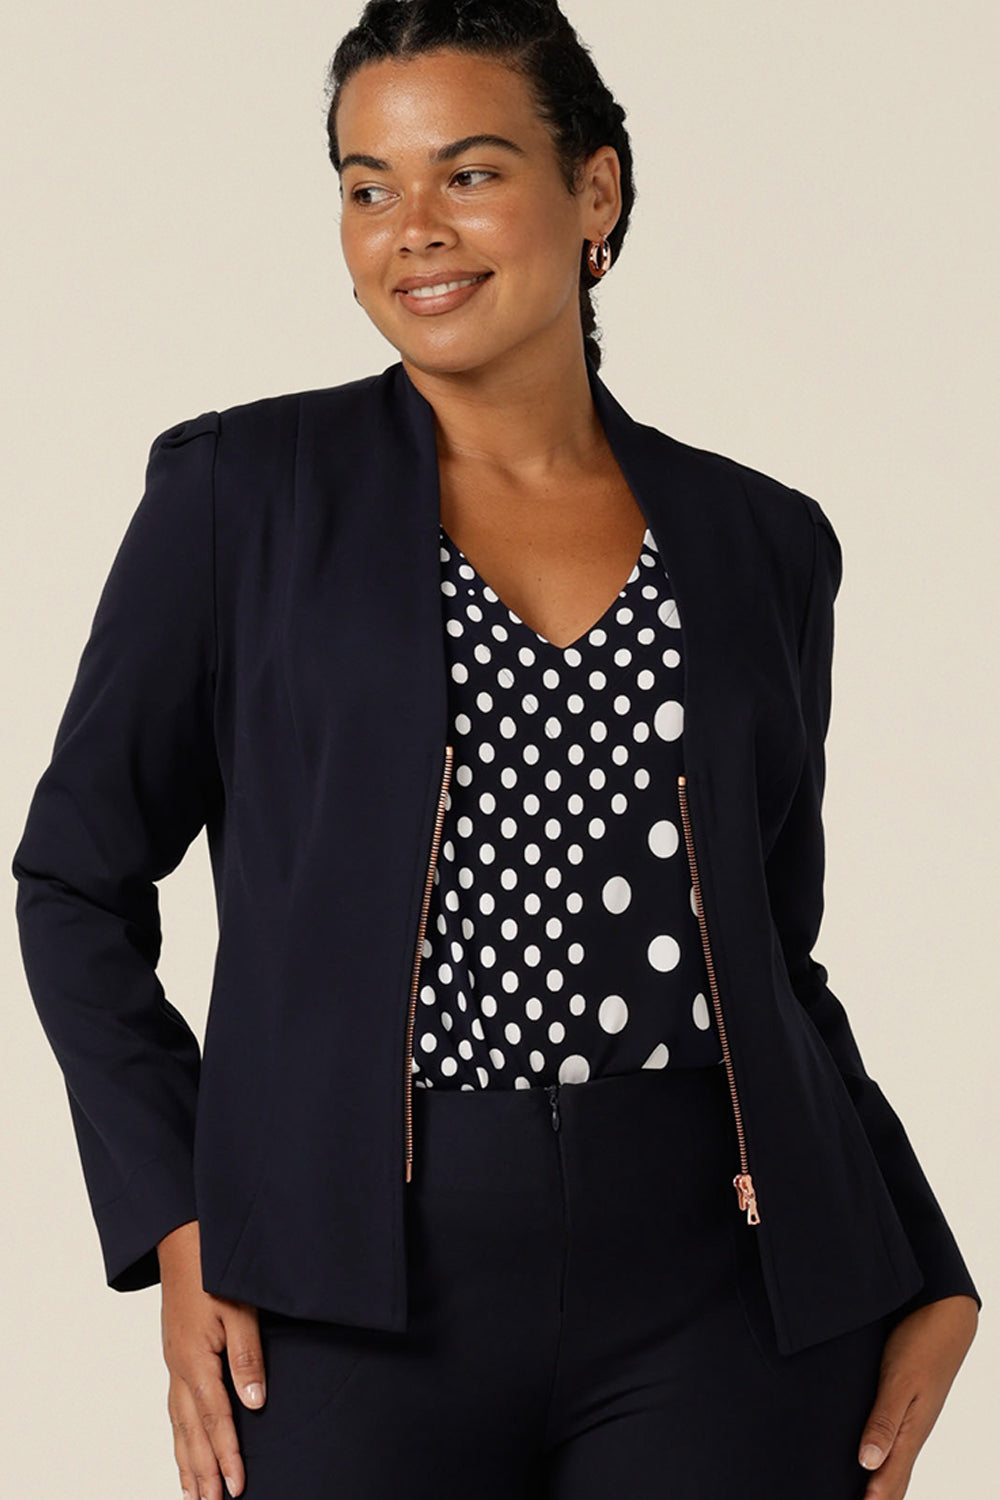 A size 12, curvy woman wears a corporate style, navy jacket with navy and white jersey top. A soft tailored jacket with rose gold zip fastening, long sleeves and a collarless neckline, this workwear jacket is worn with navy tailored trousers.